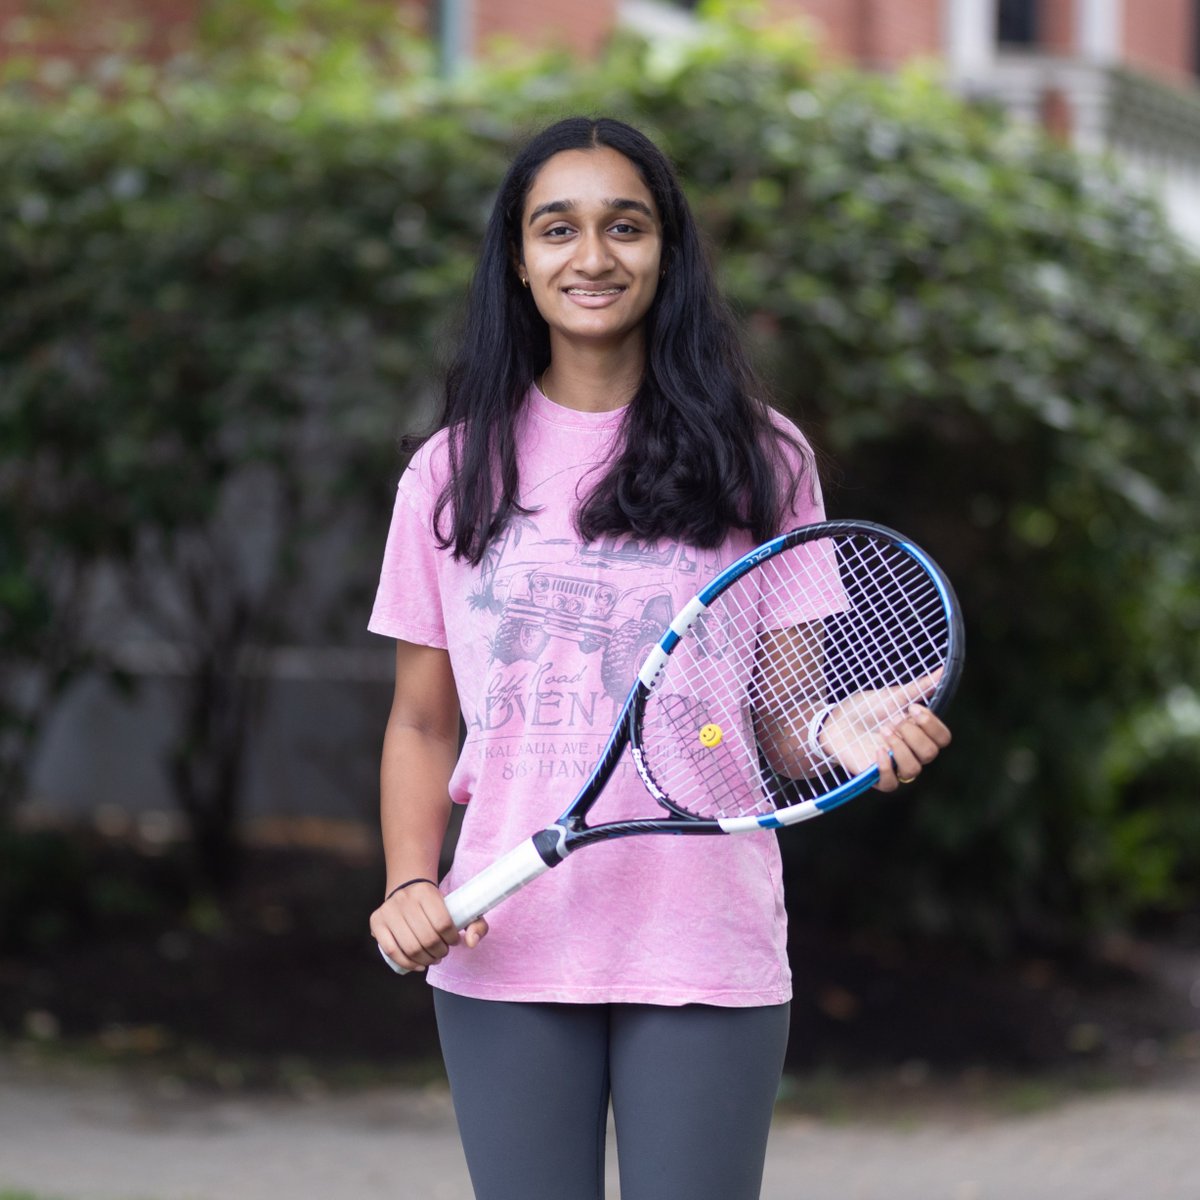 Nami, 16, became inspired by #BMC’s Child Witness to Violence Project after volunteering with the hospital. She created her own #tennis tournament and raised money to support the program. Learn how to create your own #fundraiser: bit.ly/4aj1ii8